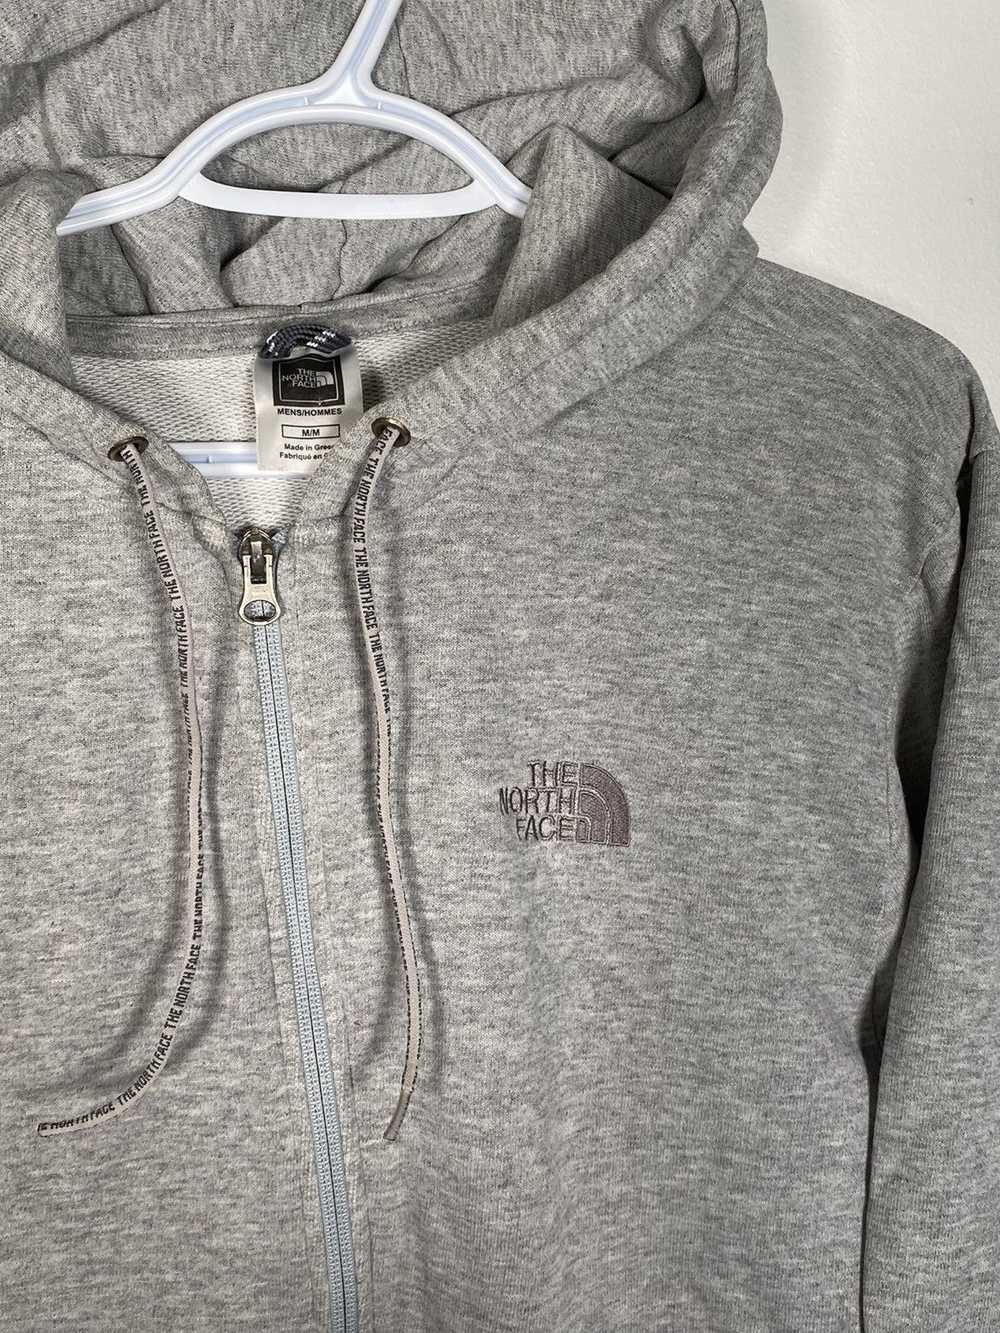 The North Face Fleece Full Zip Hoodie Made in Gre… - image 2